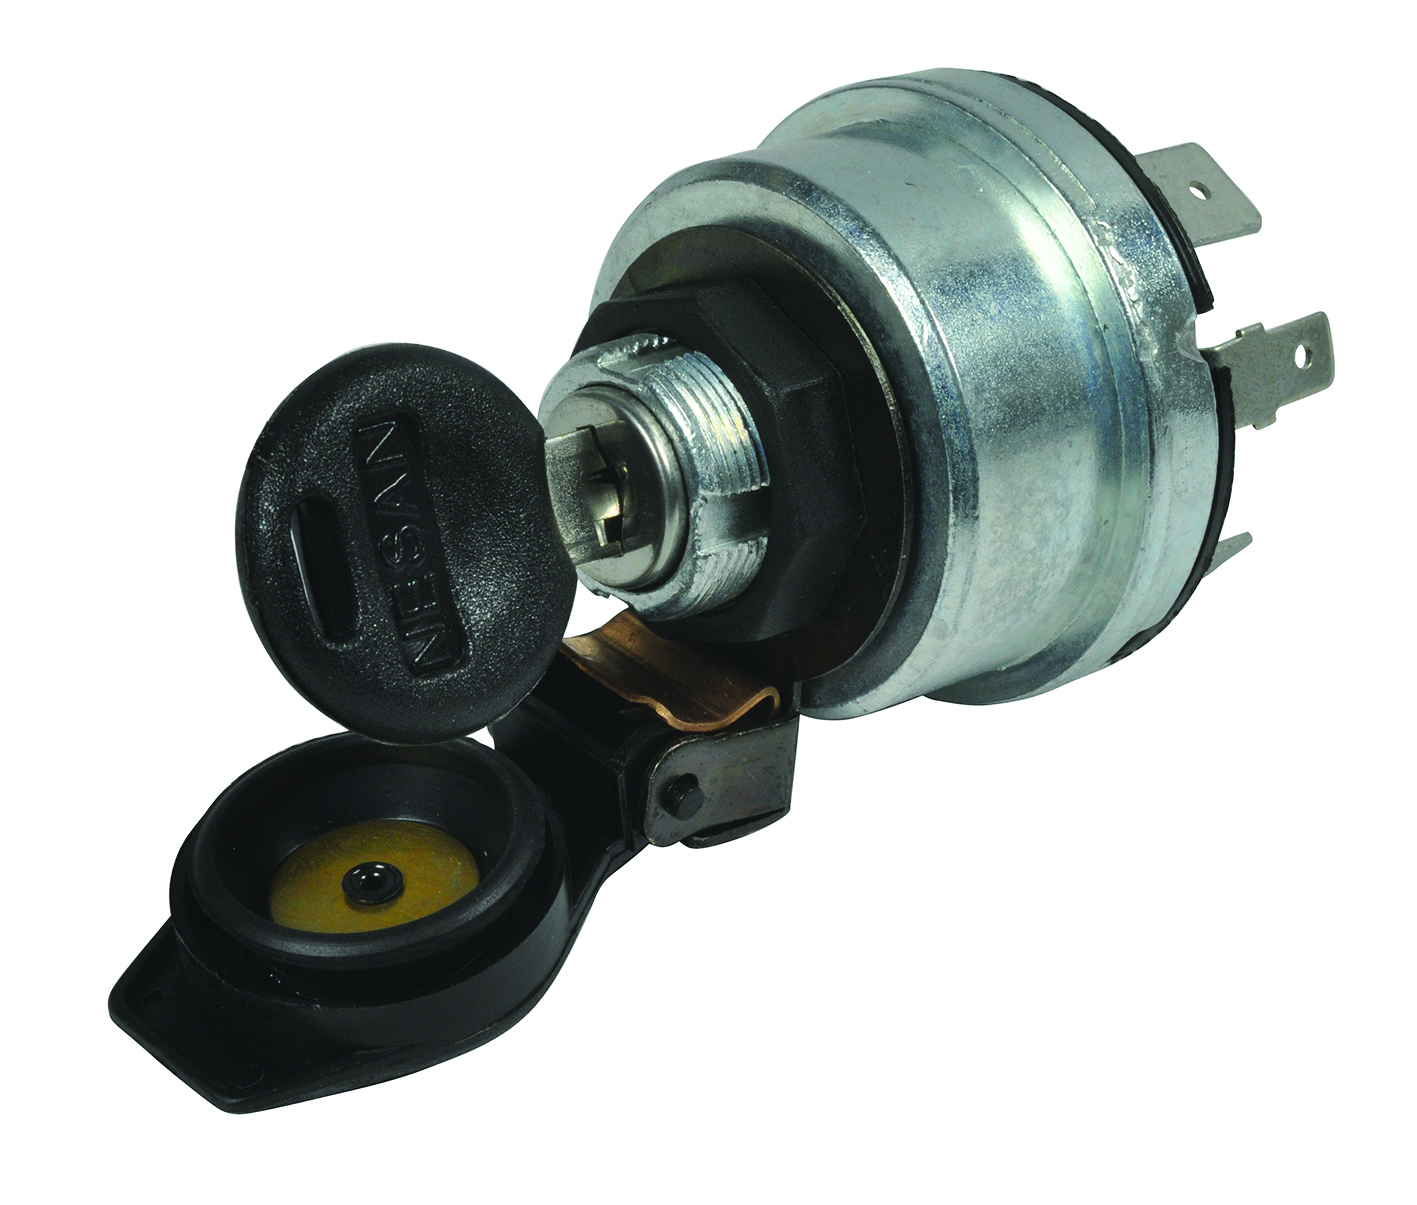 car ignition switch